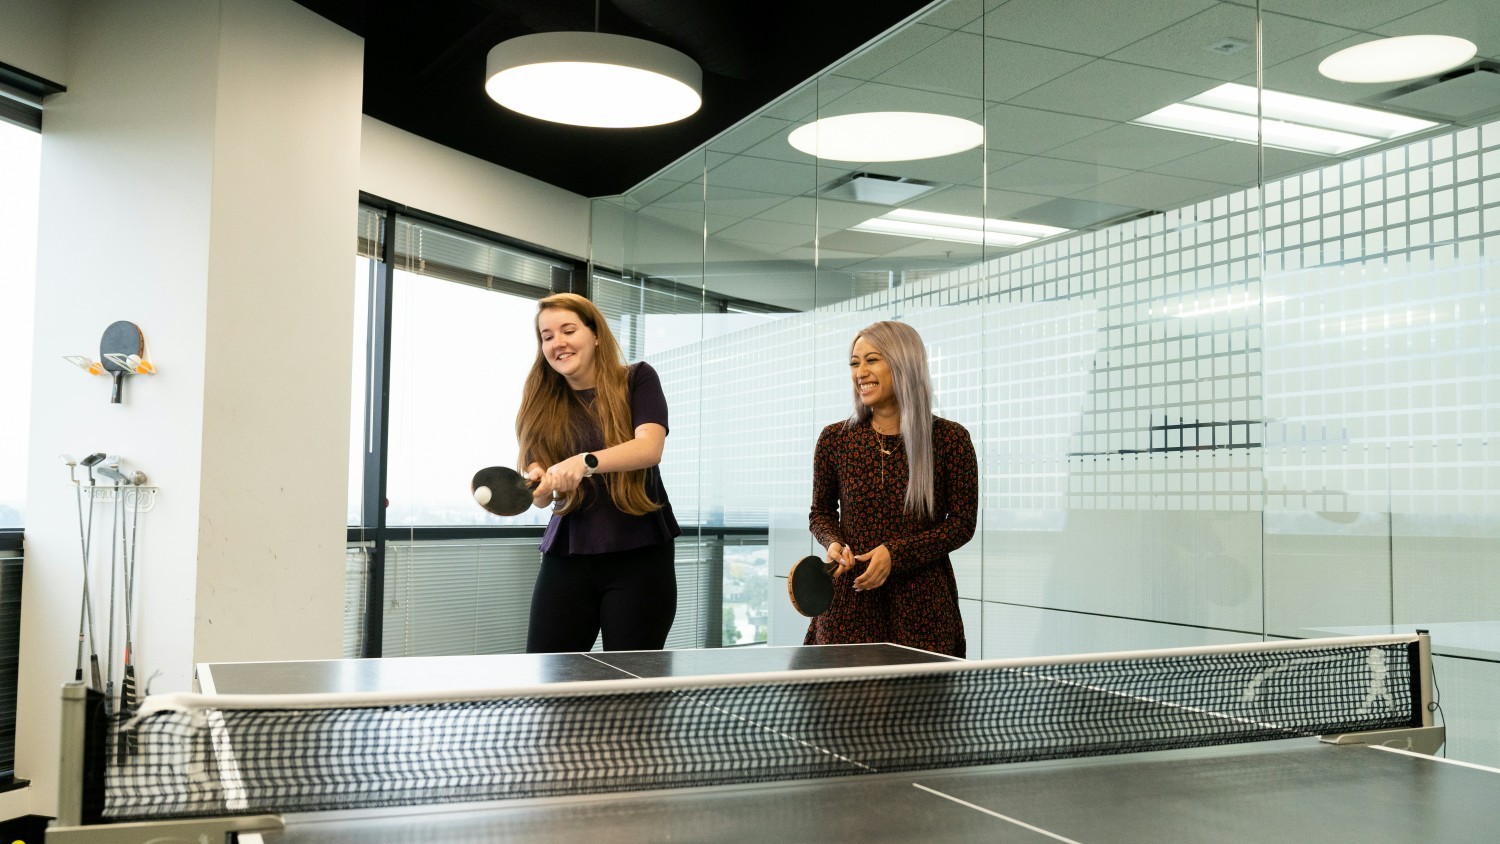 Ready to take a break? Our ping pong table and putting green are the perfect way to reset.